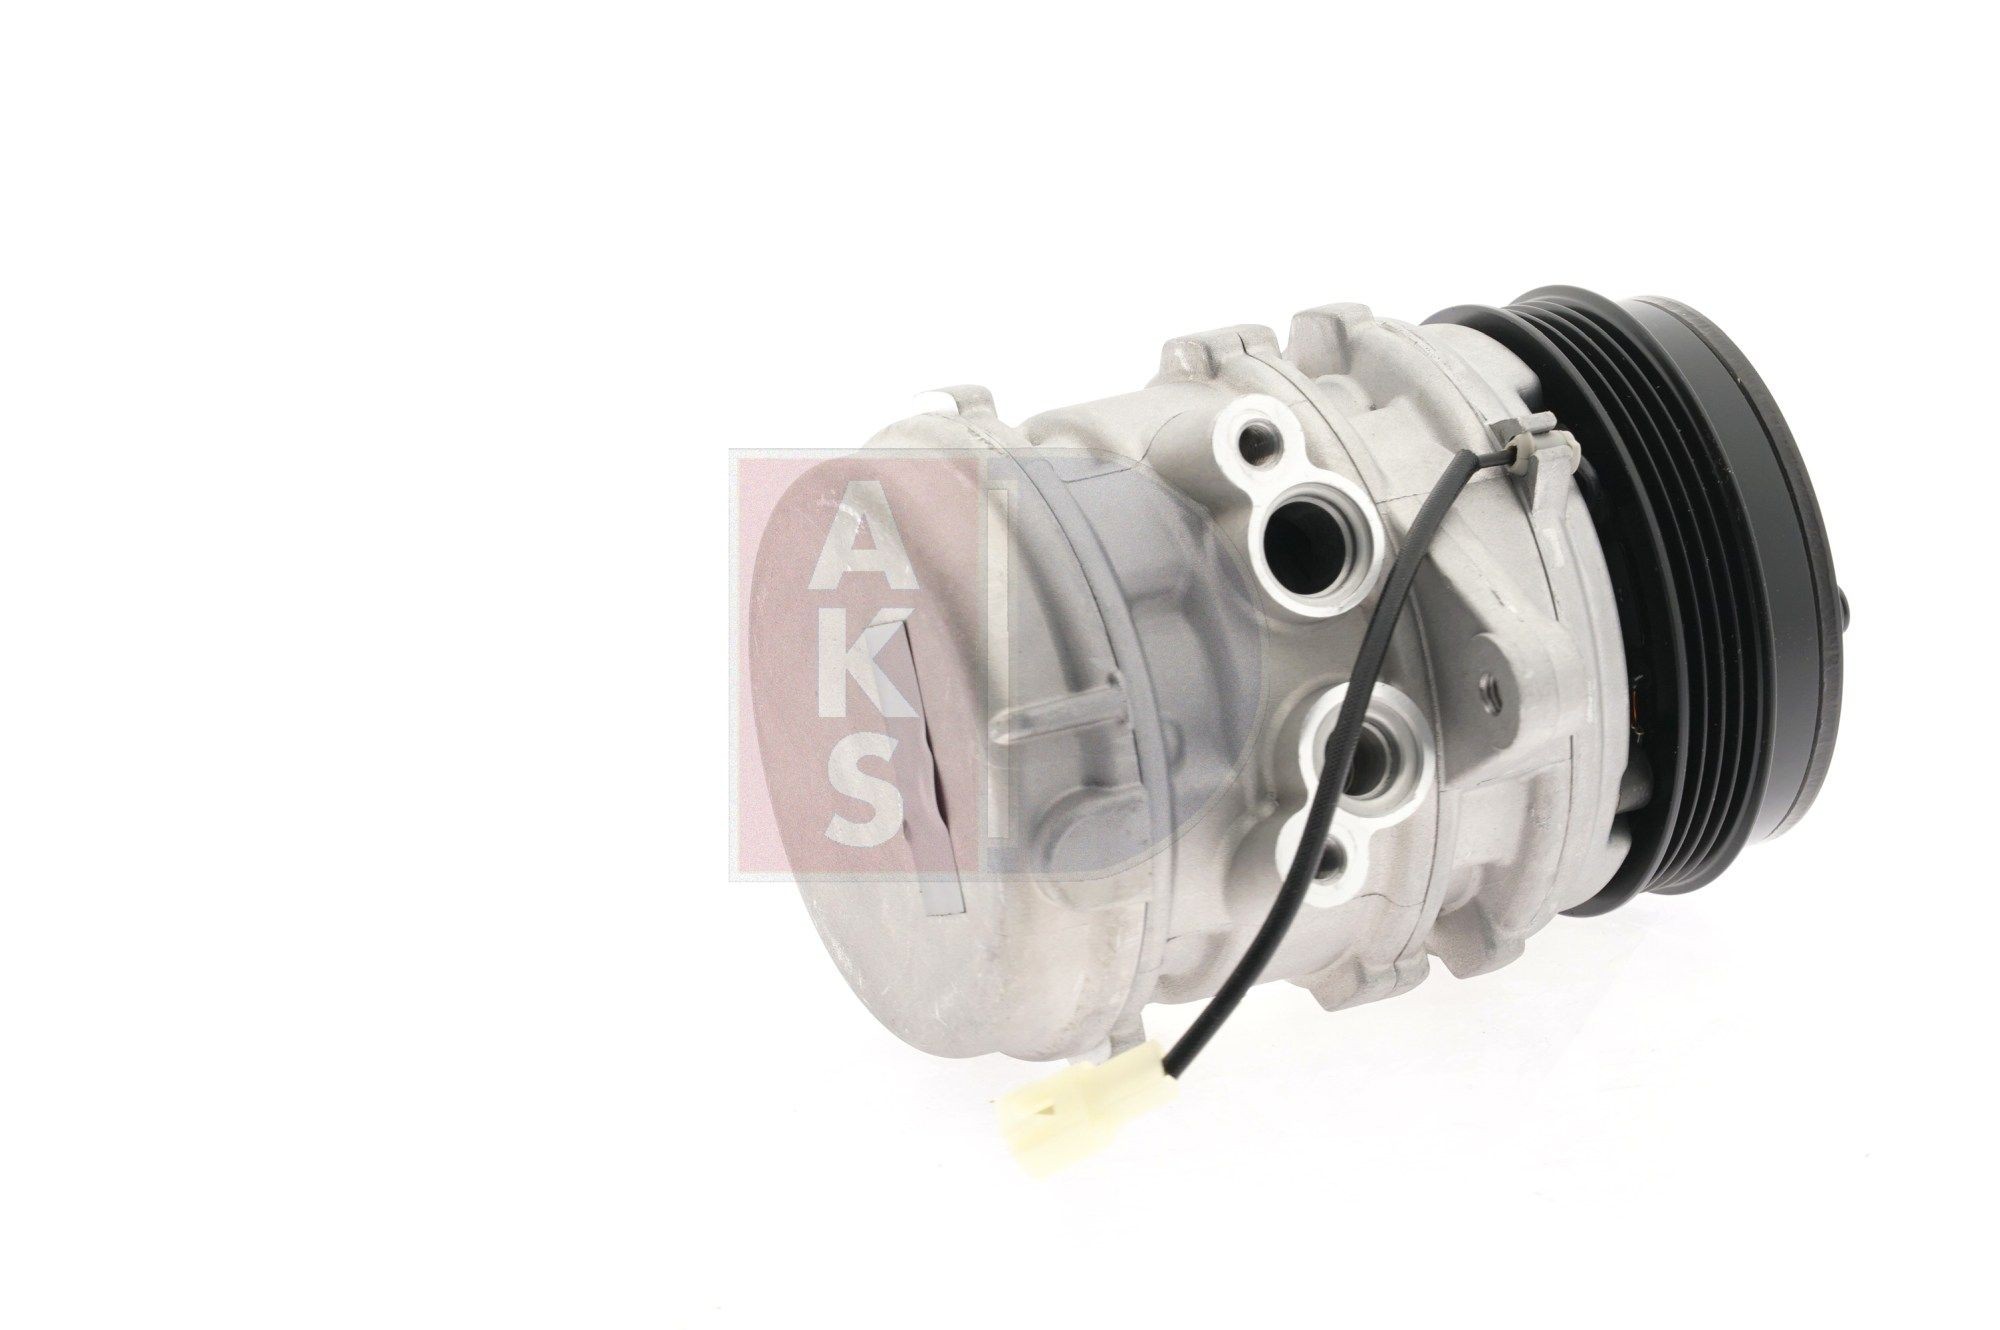 Air conditioning compressor 852042N from AKS DASIS